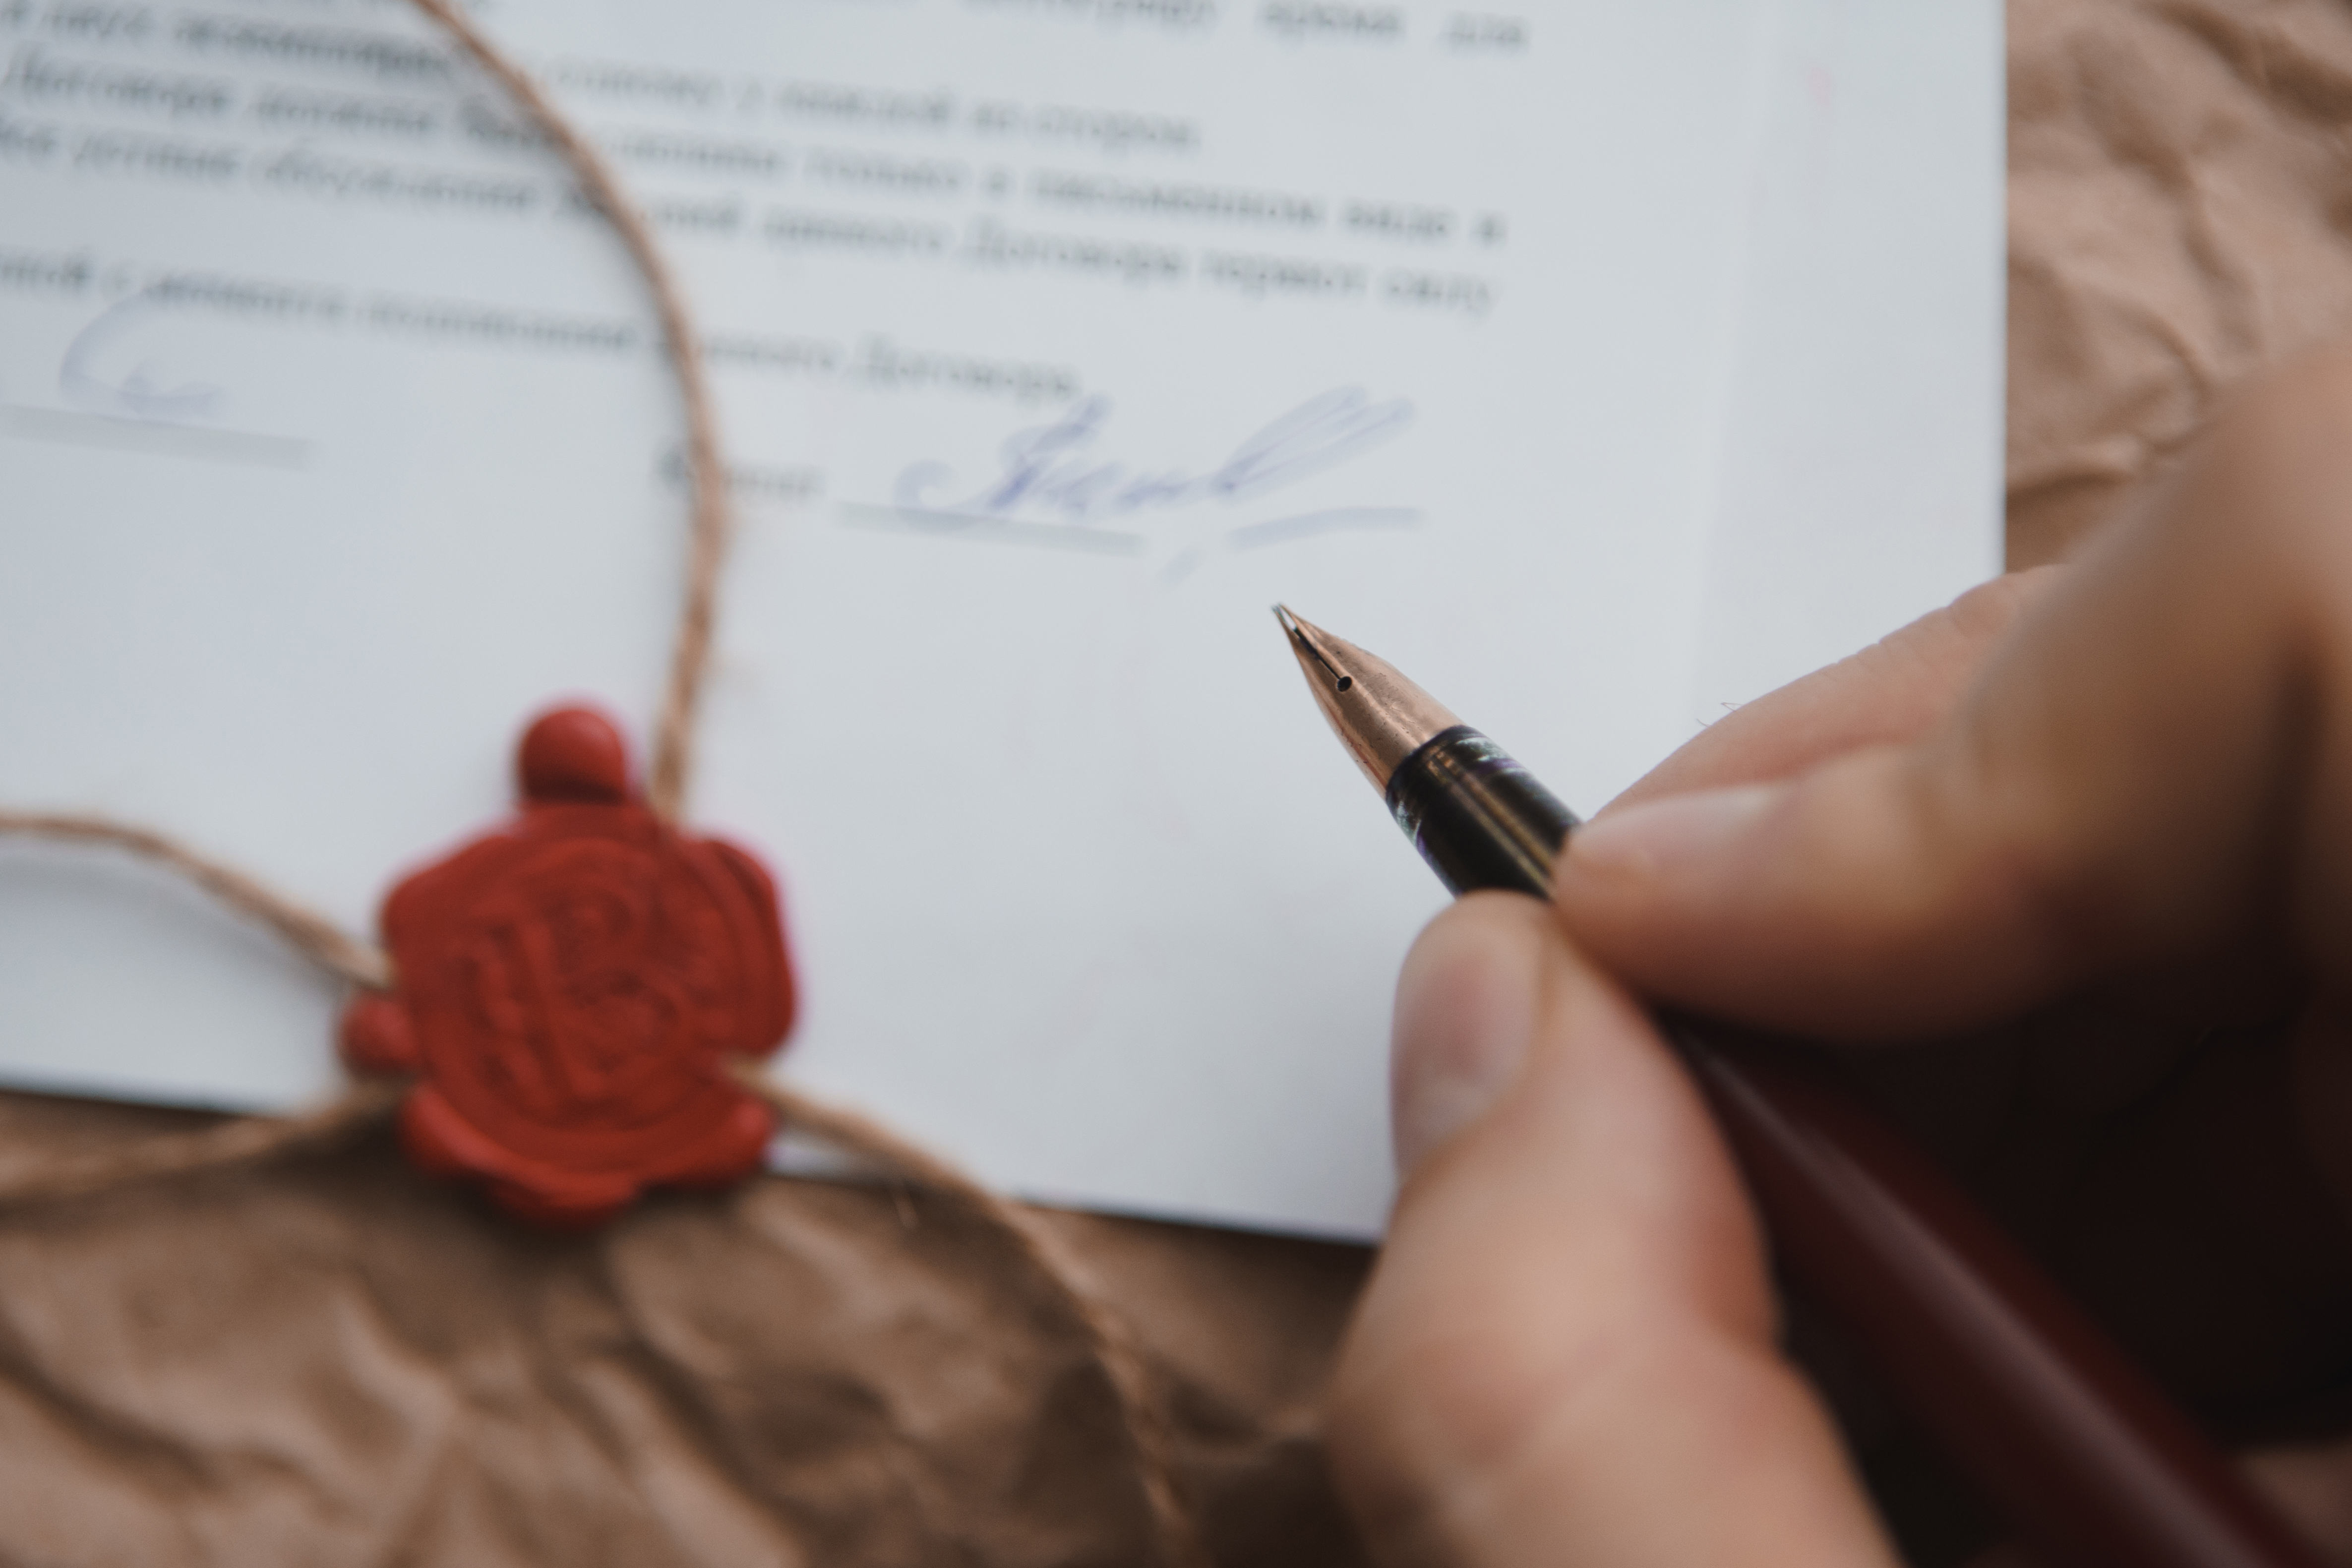 A person signing a document | Source: Shutterstock